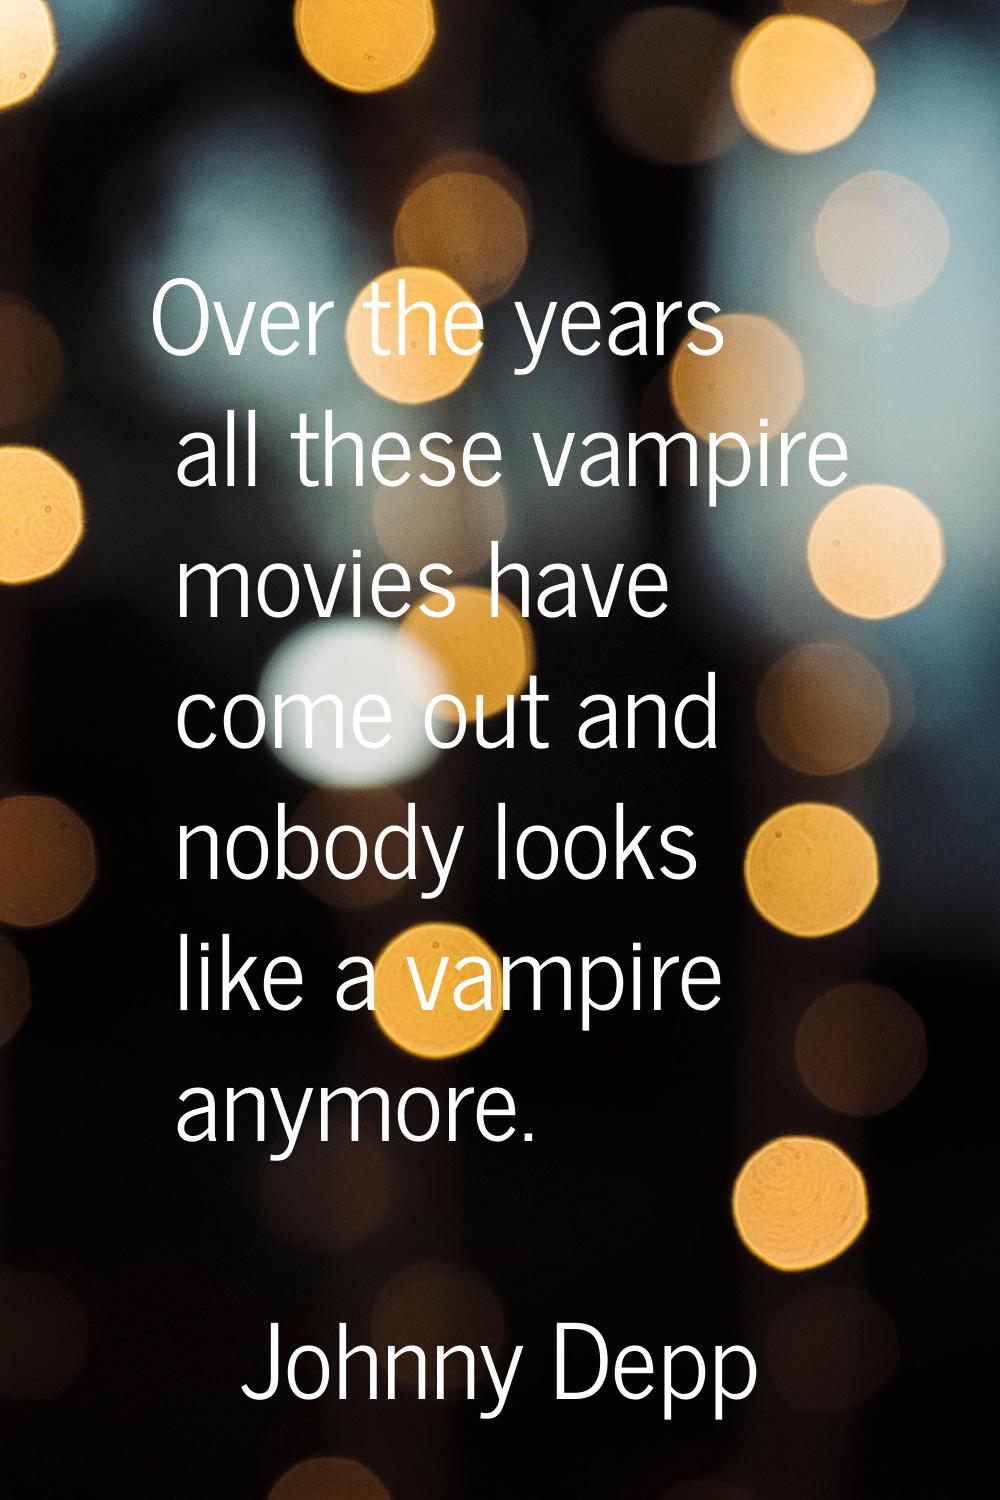 Over the years all these vampire movies have come out and nobody looks like a vampire anymore.